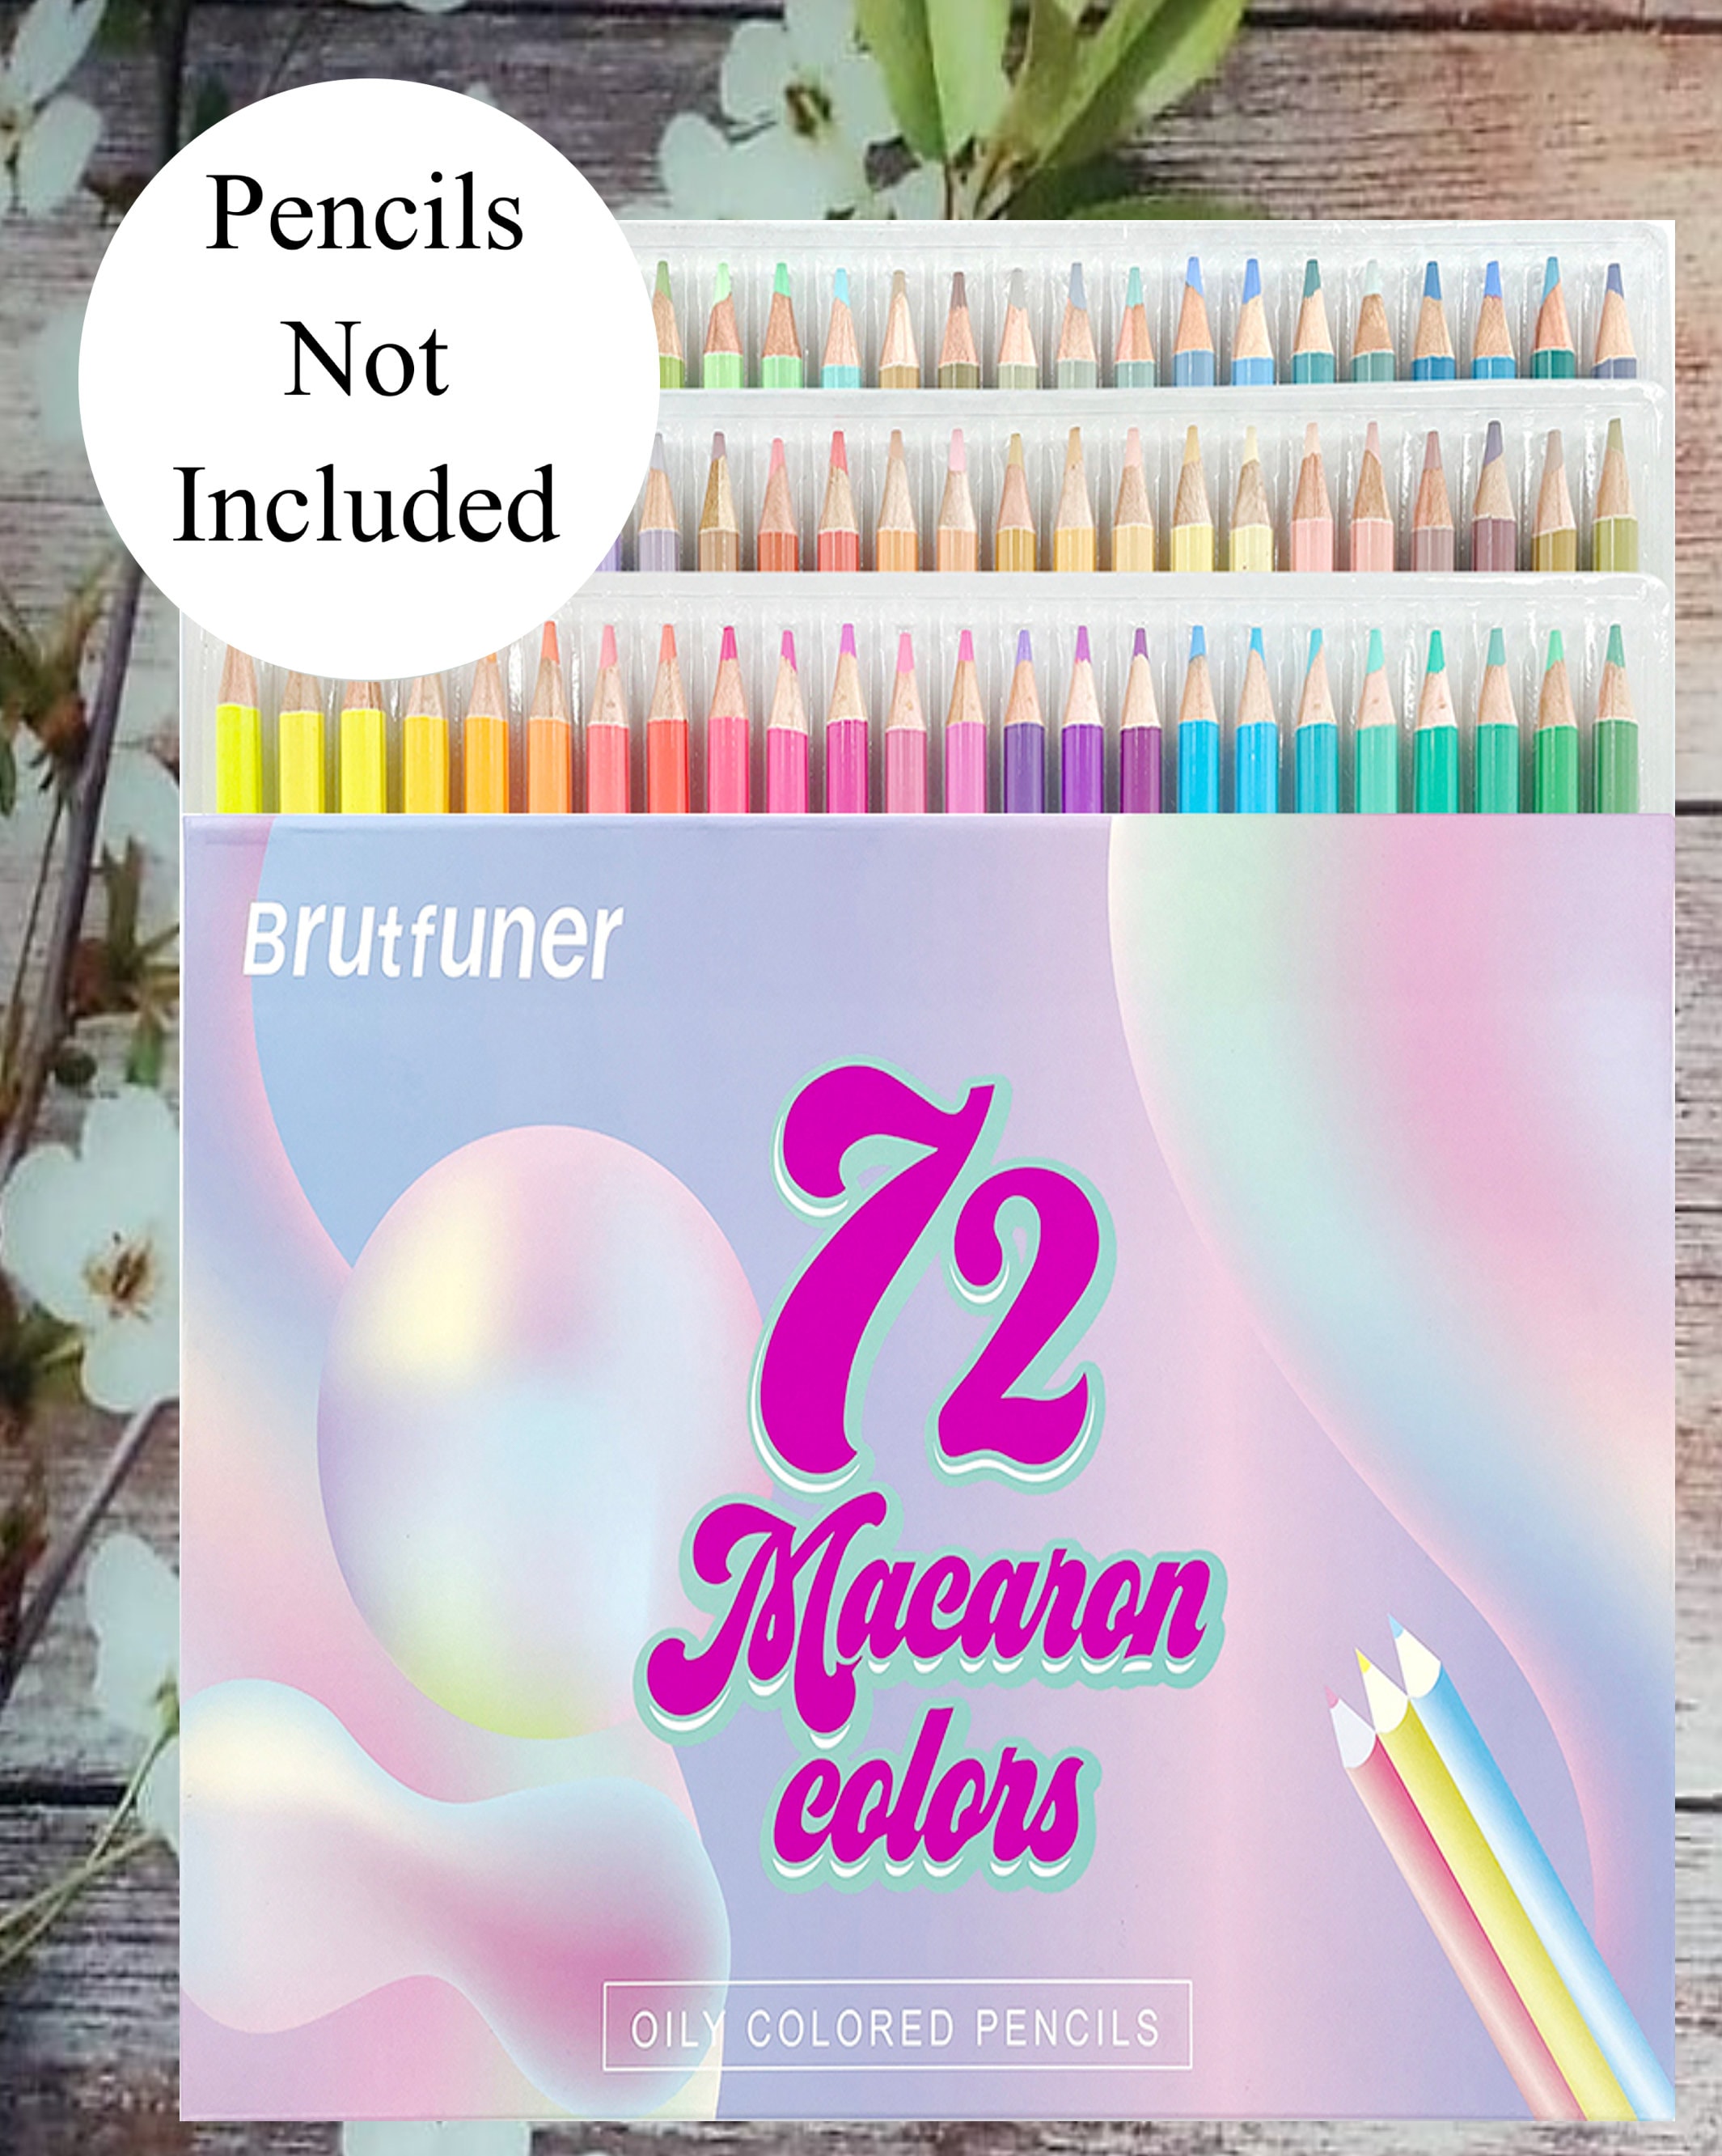 Brutfuner 520 Oily Colored Pencils DIY Color Swatch Book Style 2 